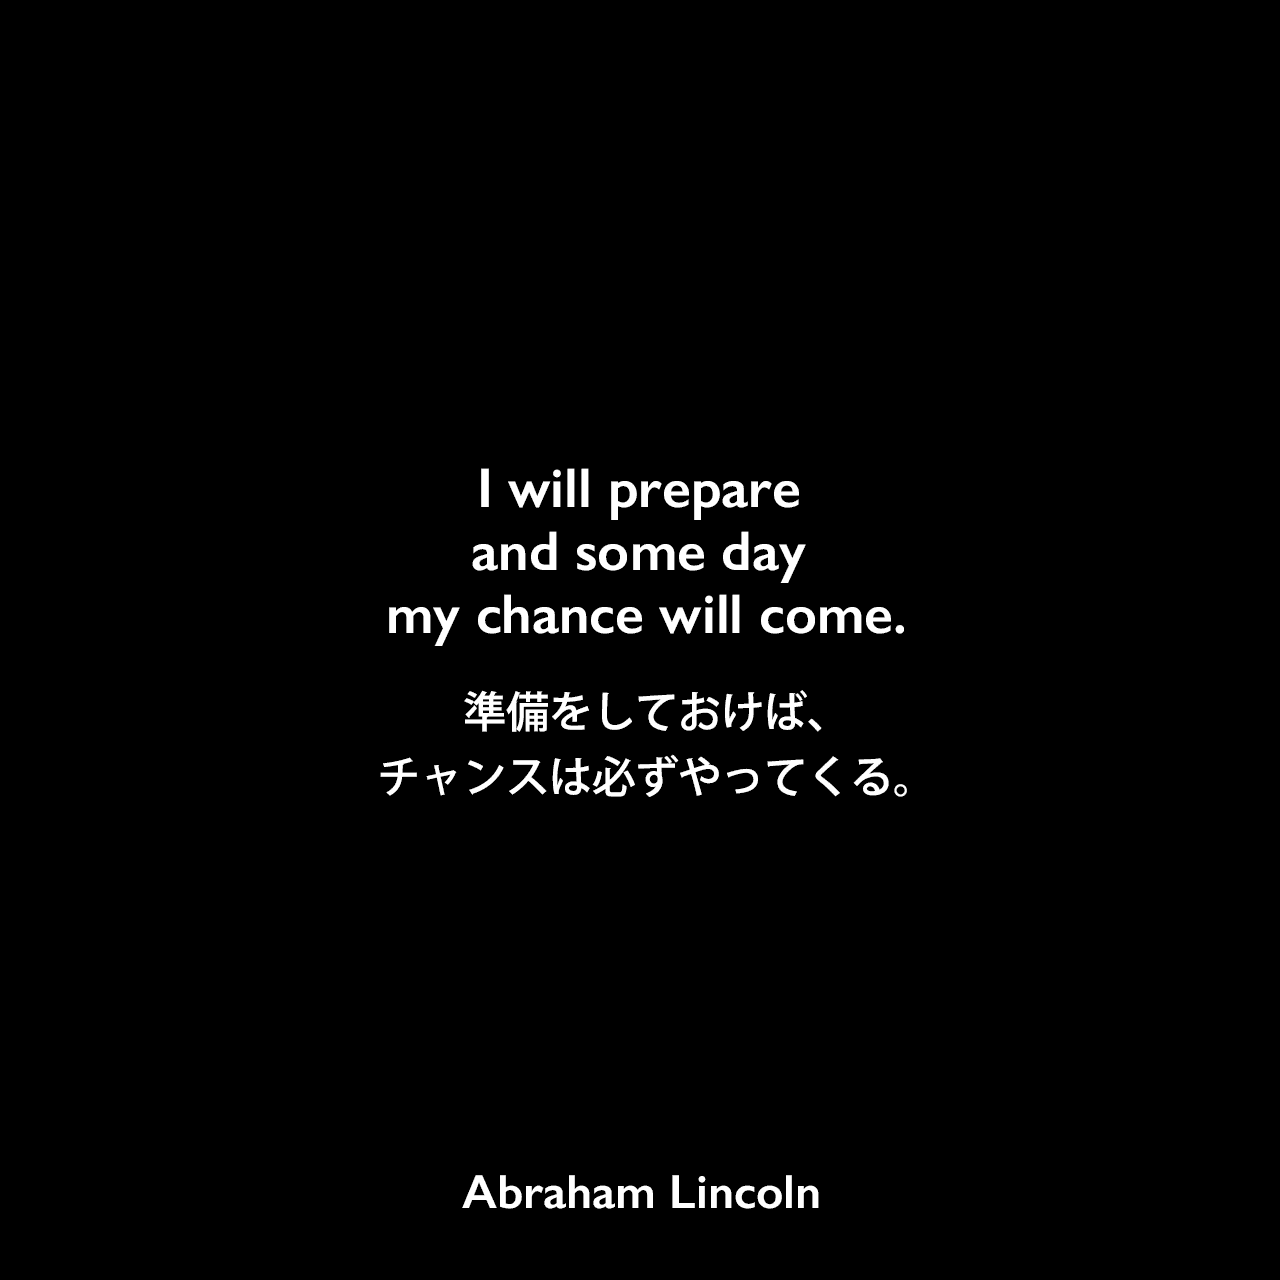 I will prepare and some day my chance will come.準備をしておけば、チャンスは必ずやってくる。Abraham Lincoln